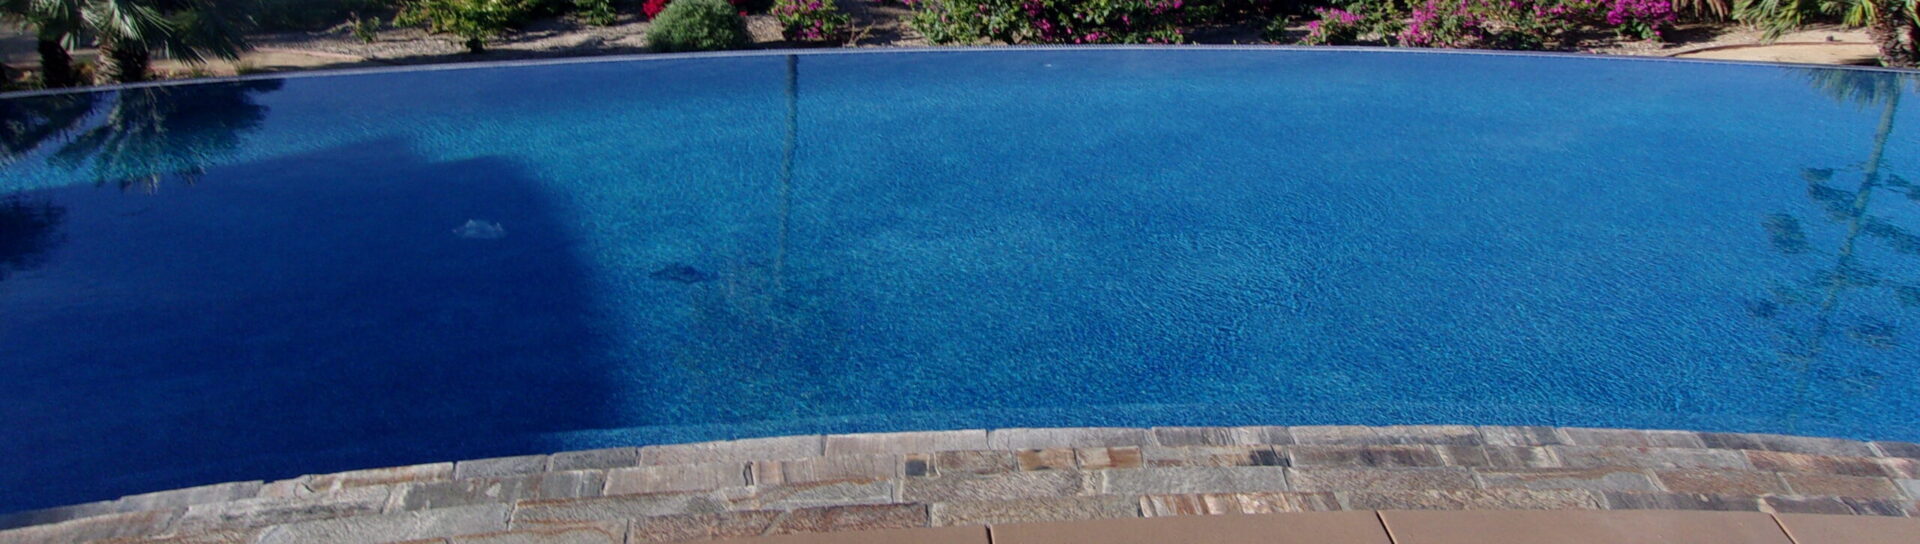 Alan Smith Pool Plastering & Remodeling|JewelScapes